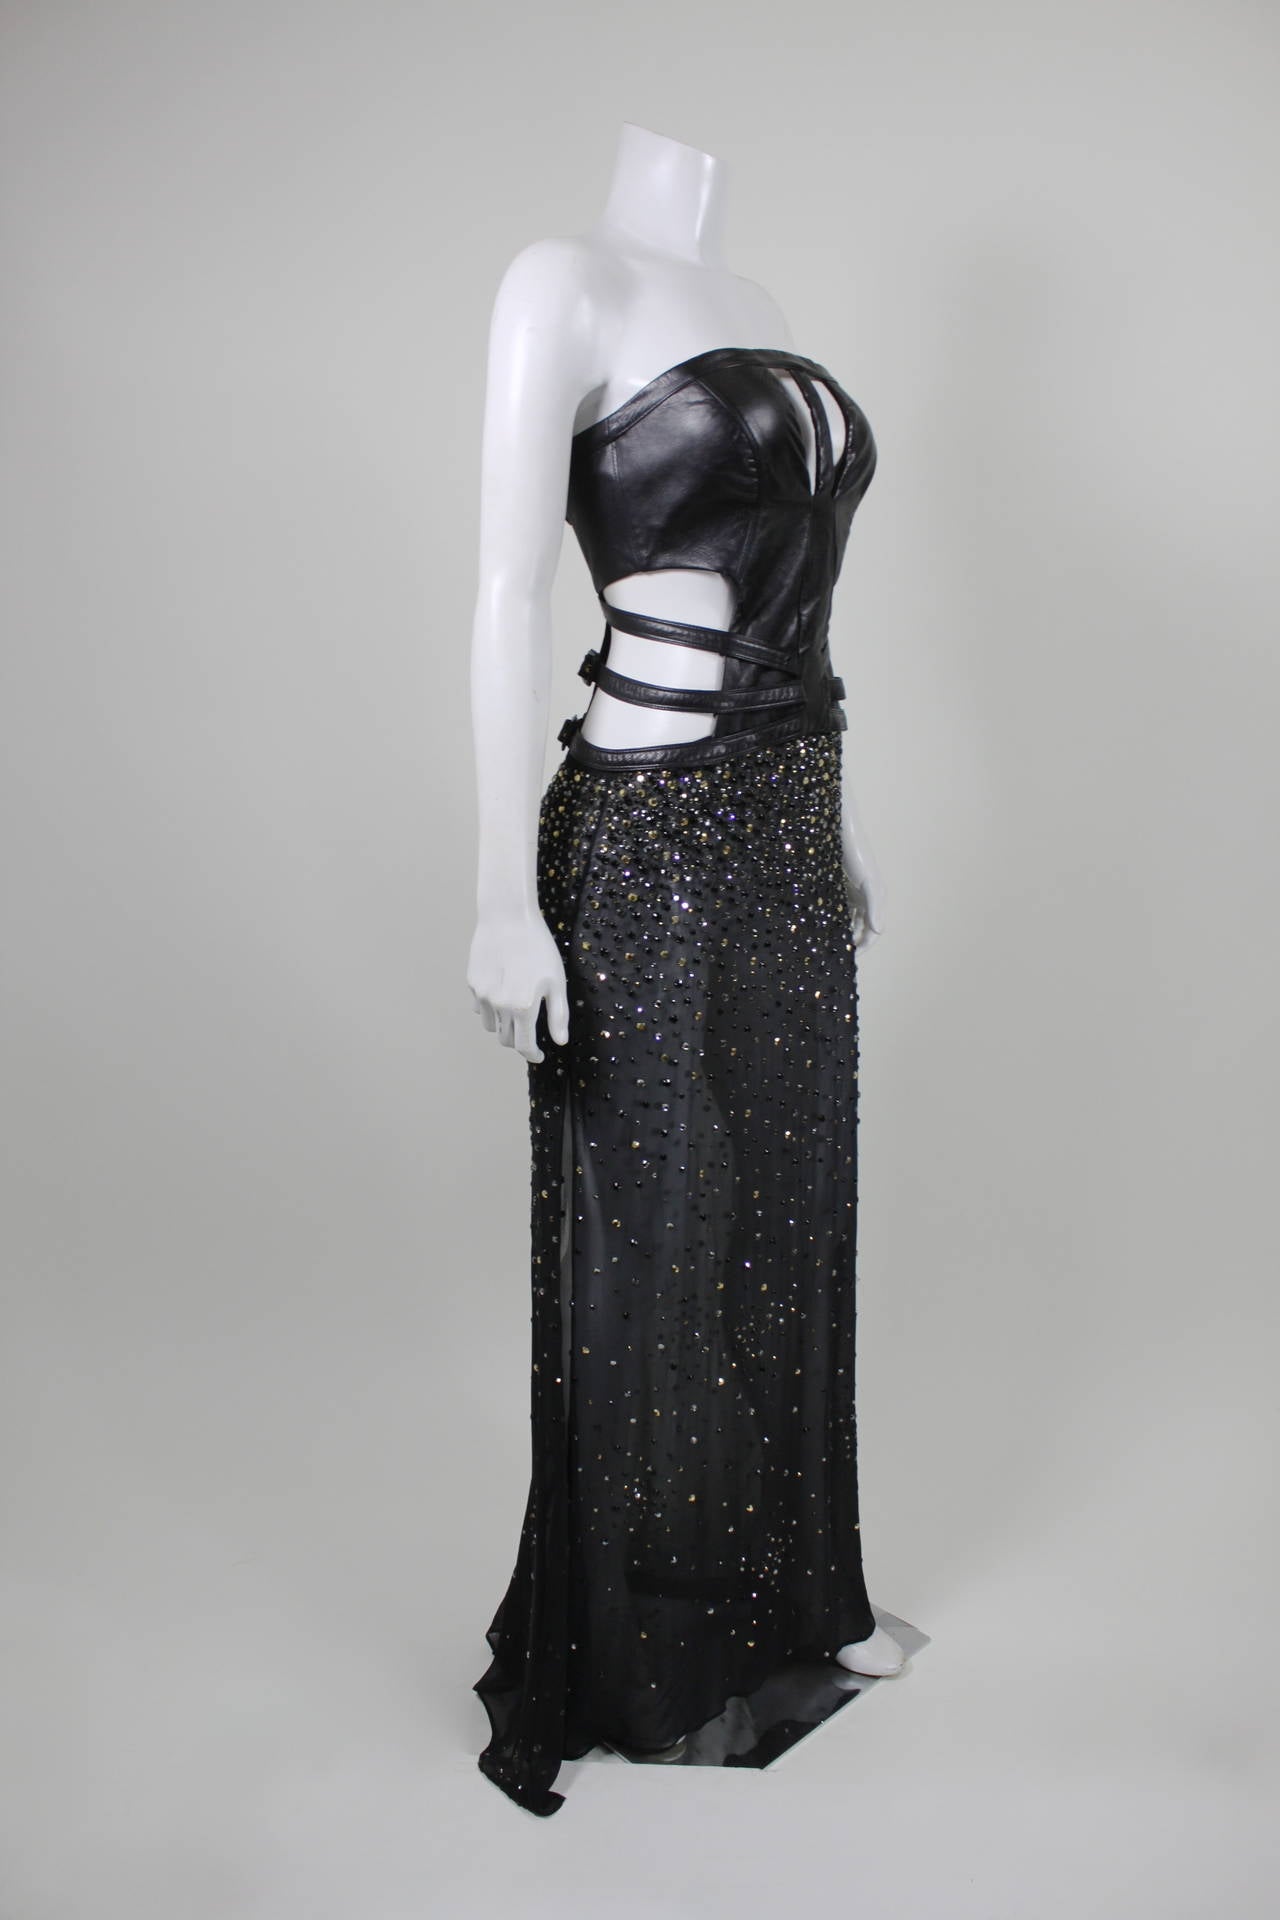 Gianni Versace Black Leather, Rhinestone and Chiffon Evening Gown For Sale 1